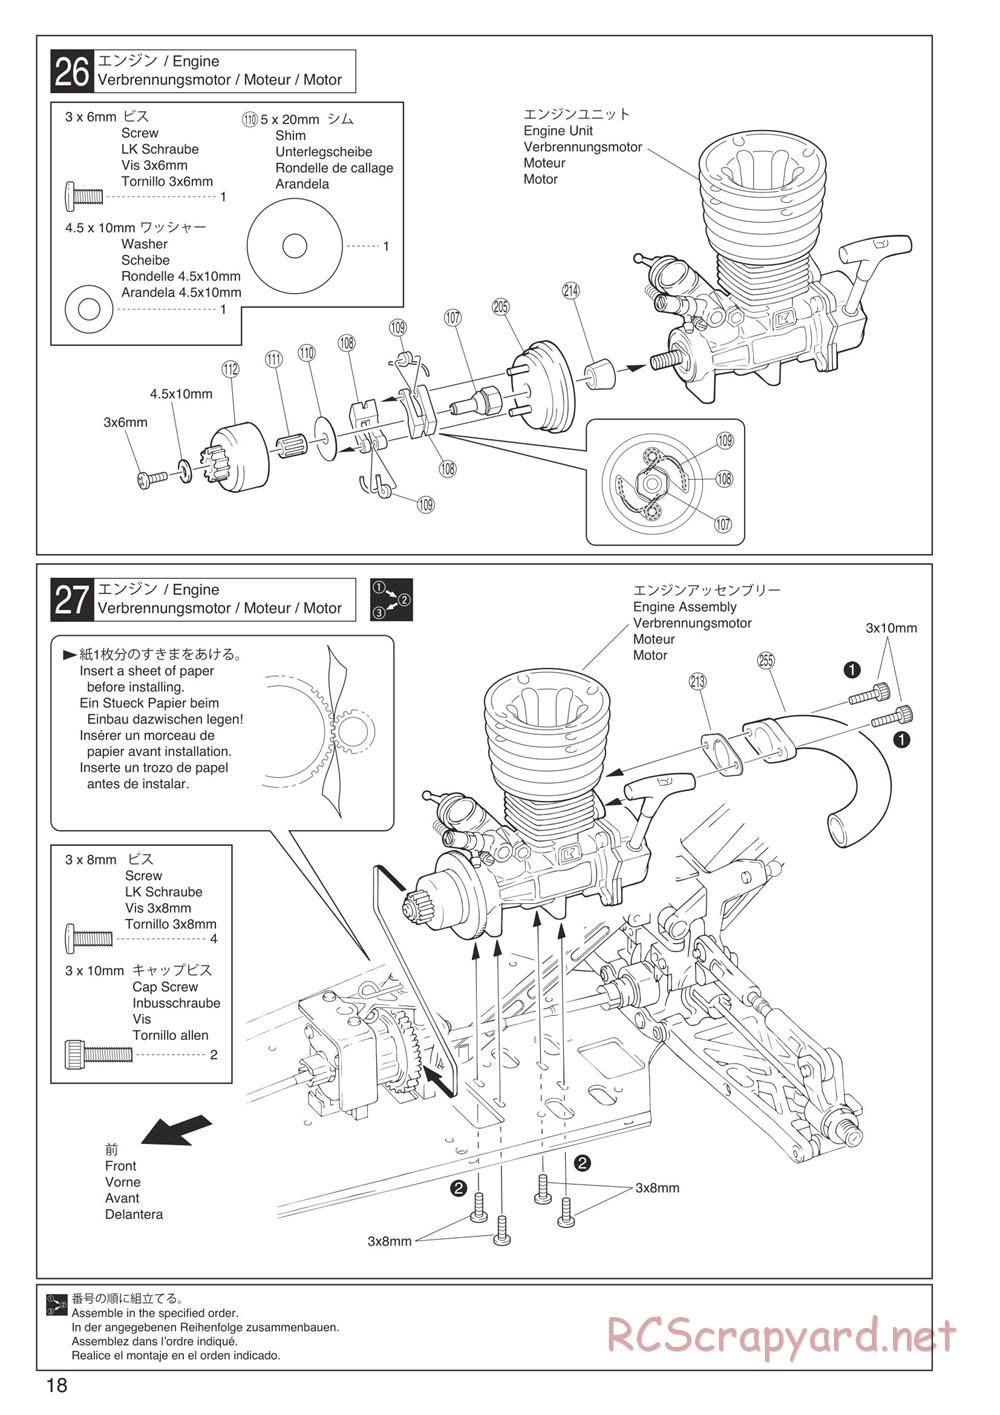 Kyosho - Inferno Neo - Manual - Page 18